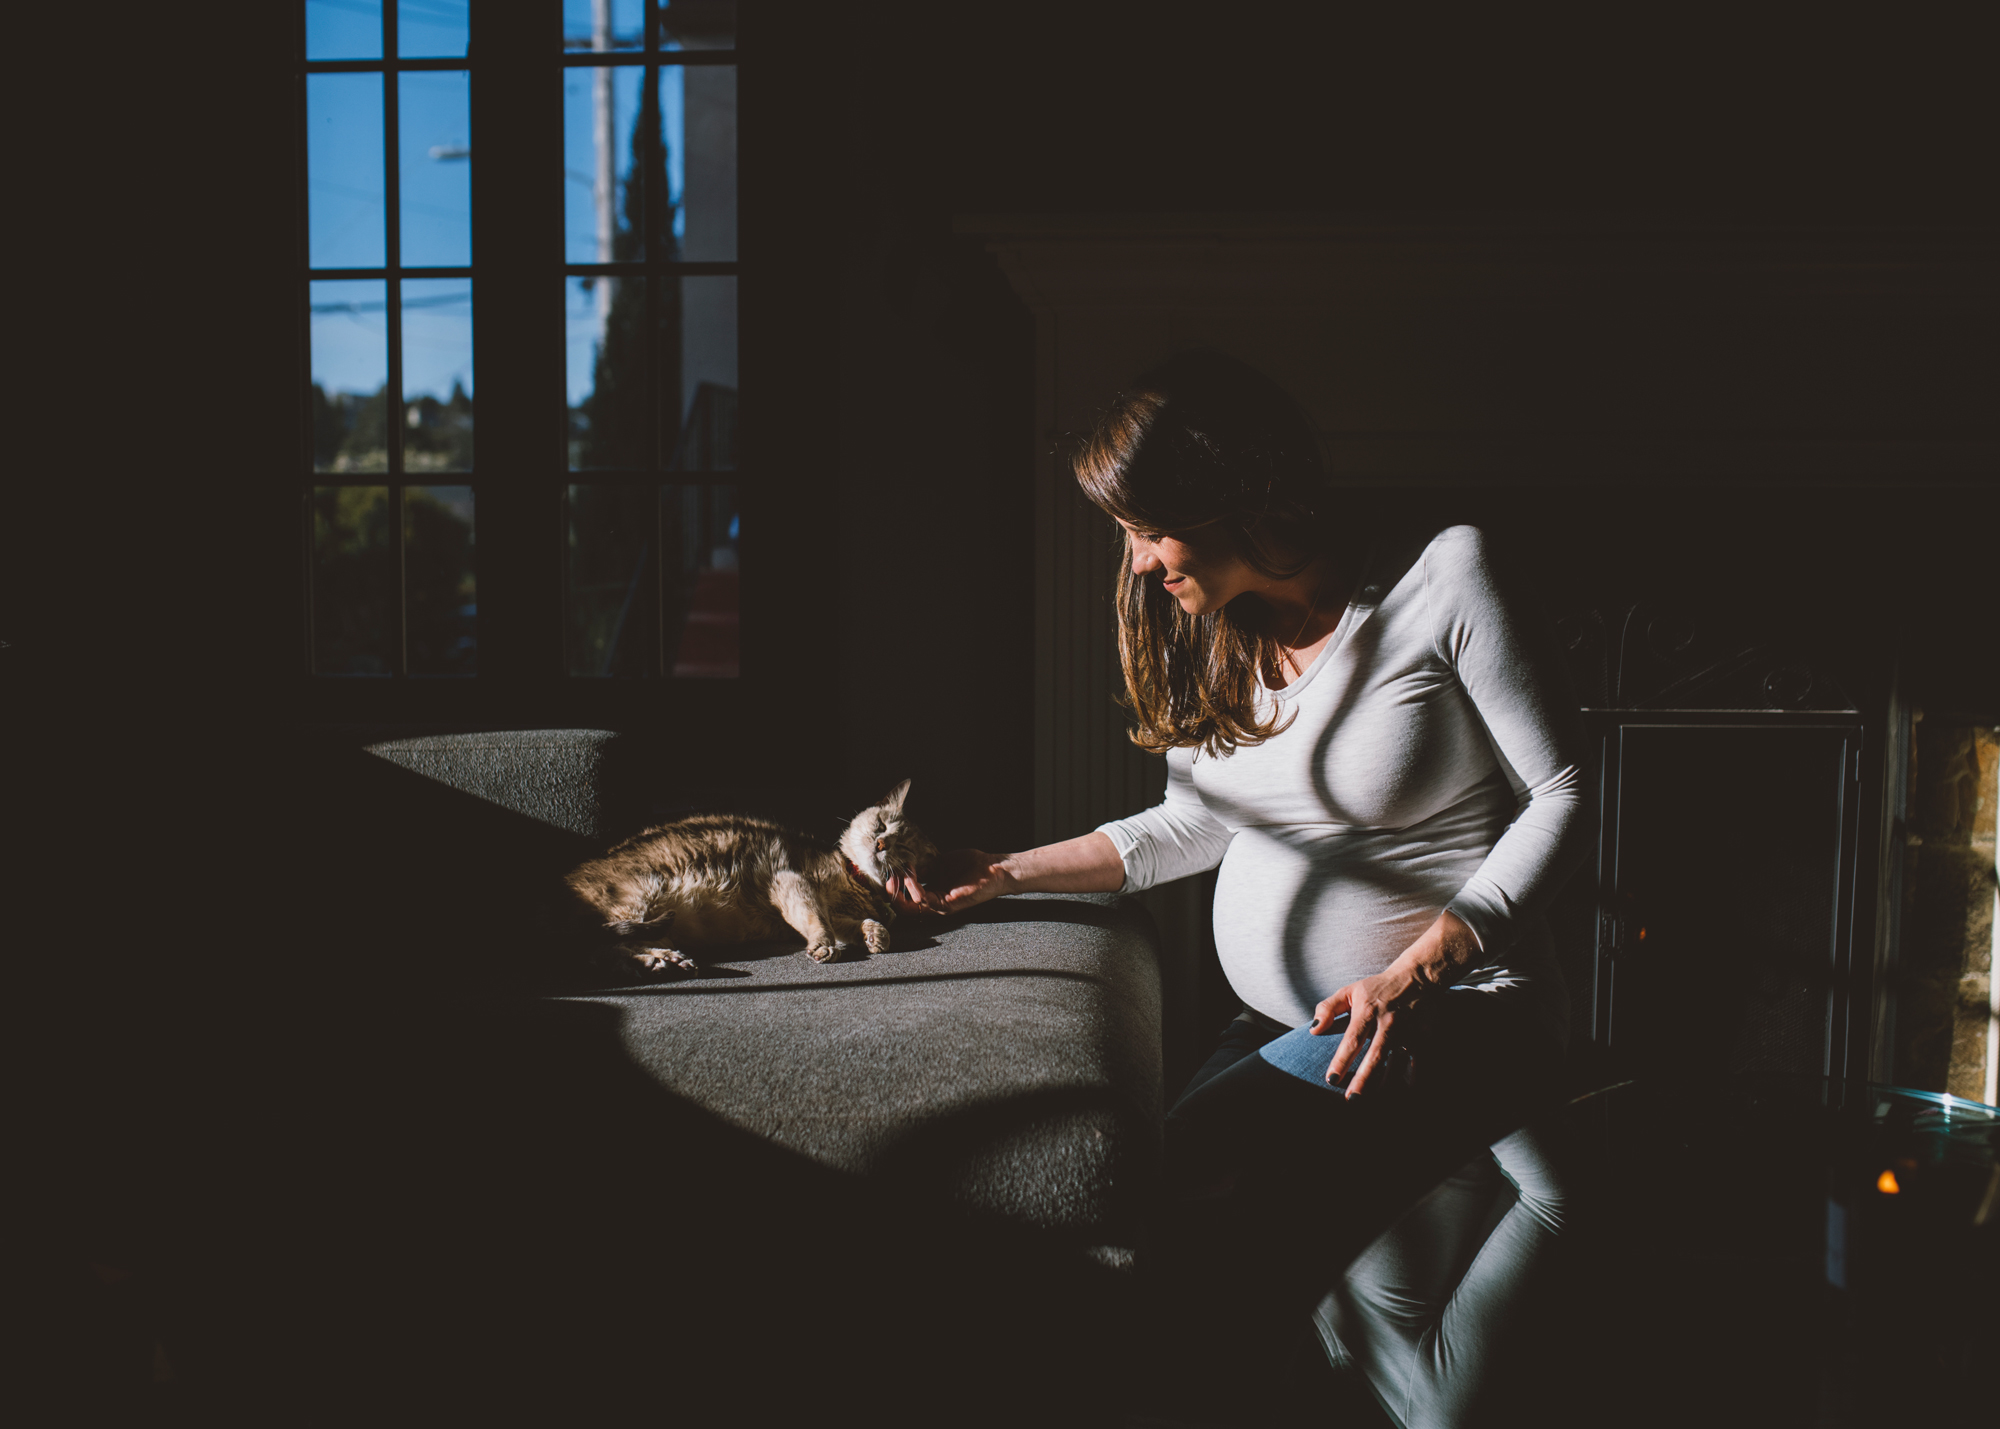 shadow-and-light-maternity-photo-with-a-cat.jpg